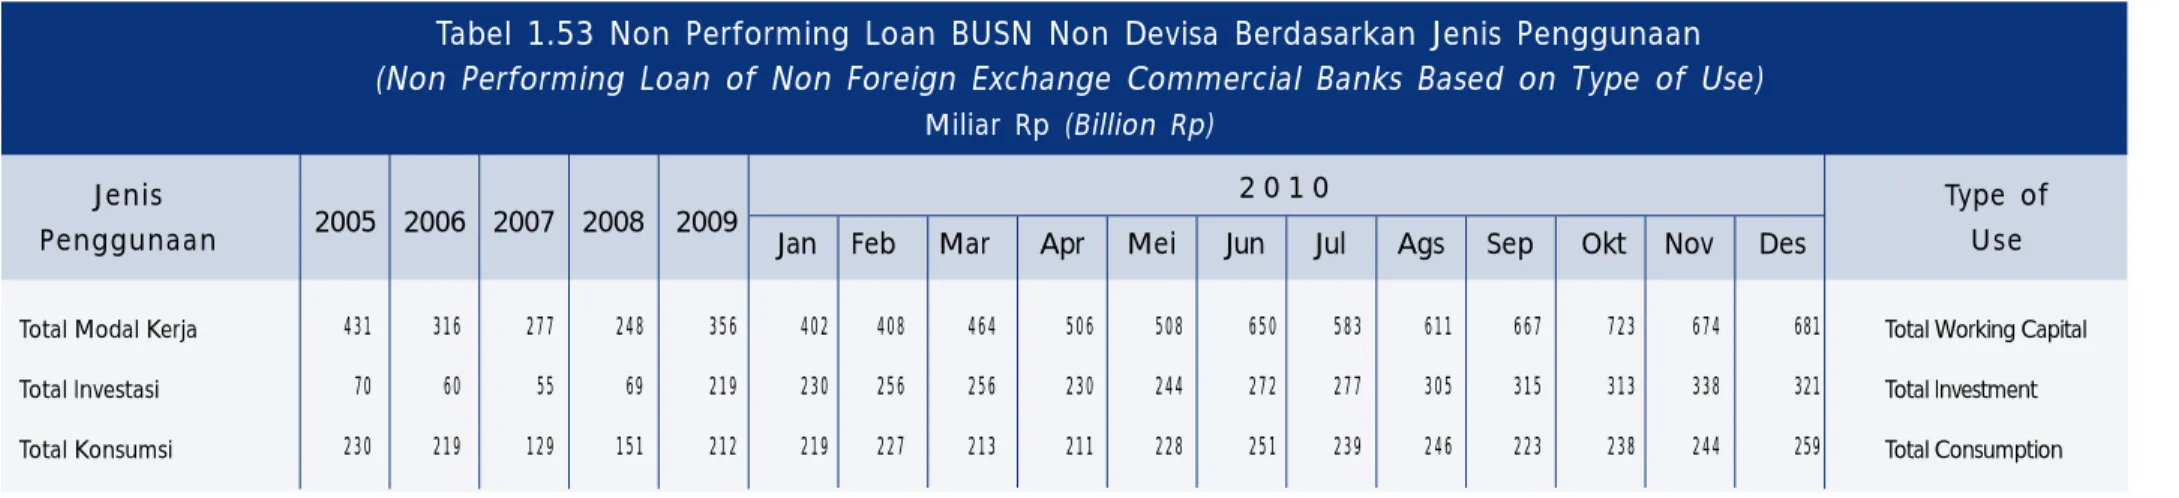 Tabel 1.53 Non Performing Loan BUSN Non Devisa Berdasarkan Jenis Penggunaan (Non Performing Loan of Non Foreign Exchange Commercial Banks Based on Type of Use)